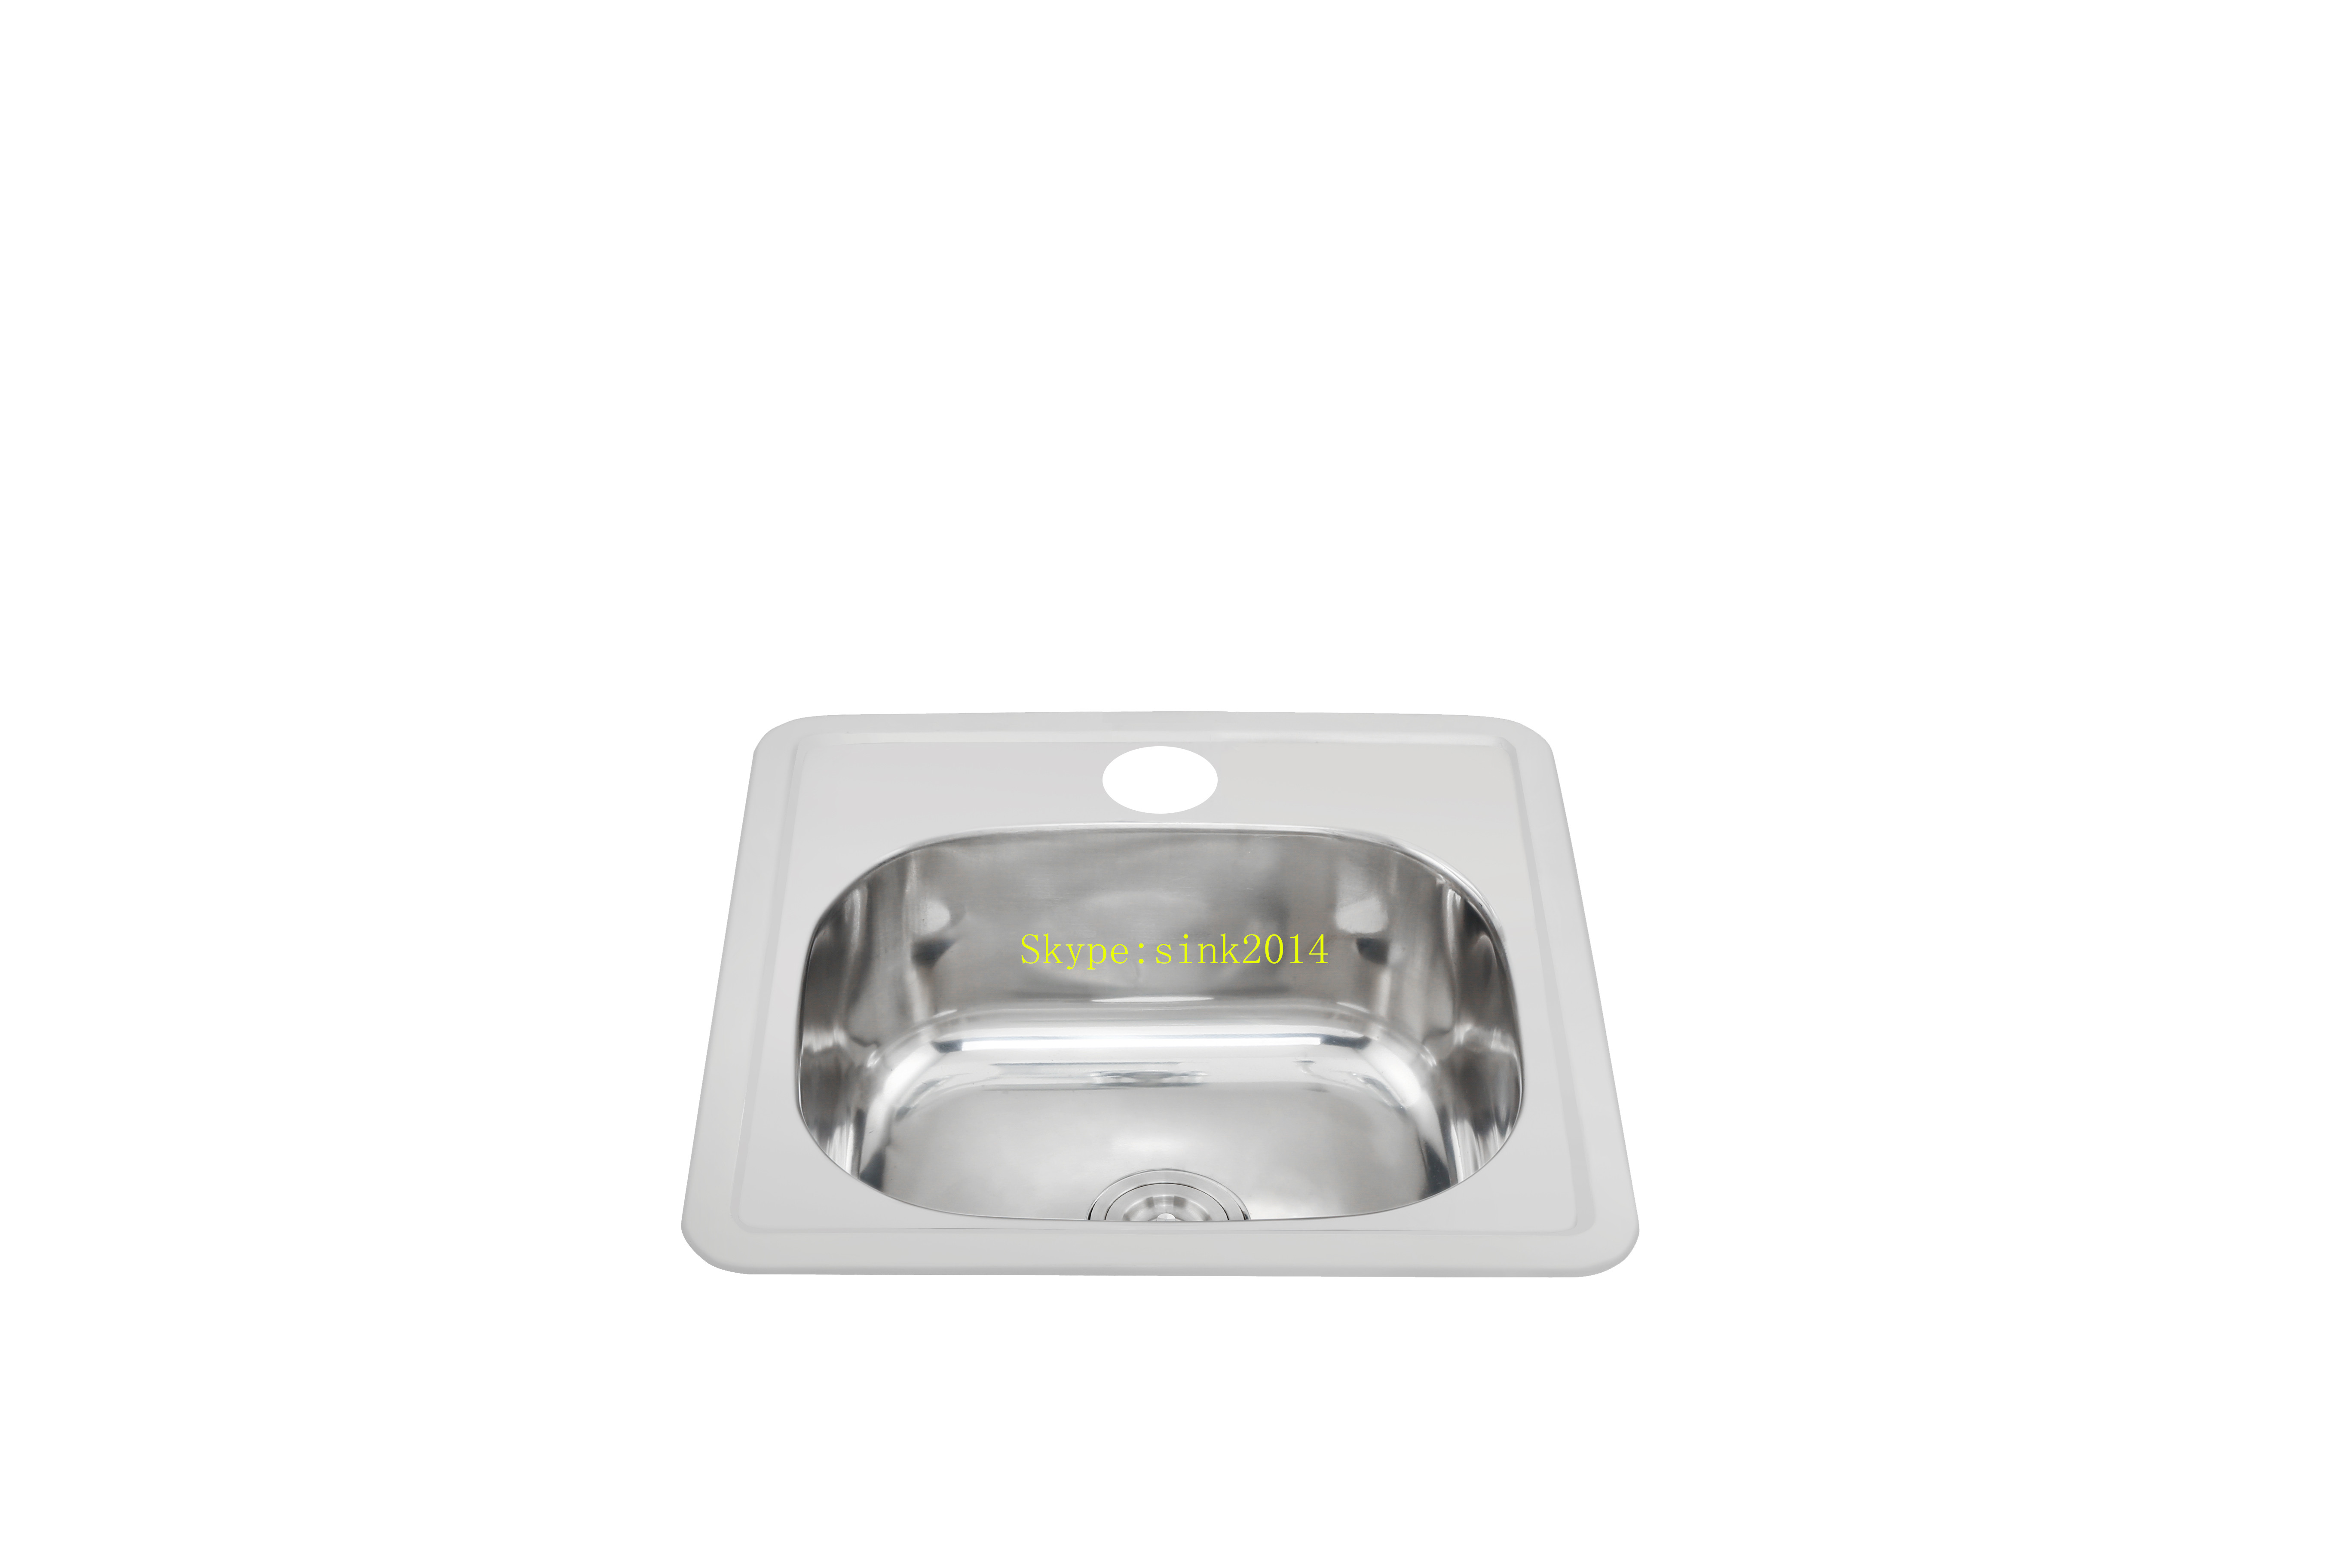 China Factory Suppy Stainless Steel Kitchen Sink WY-3838